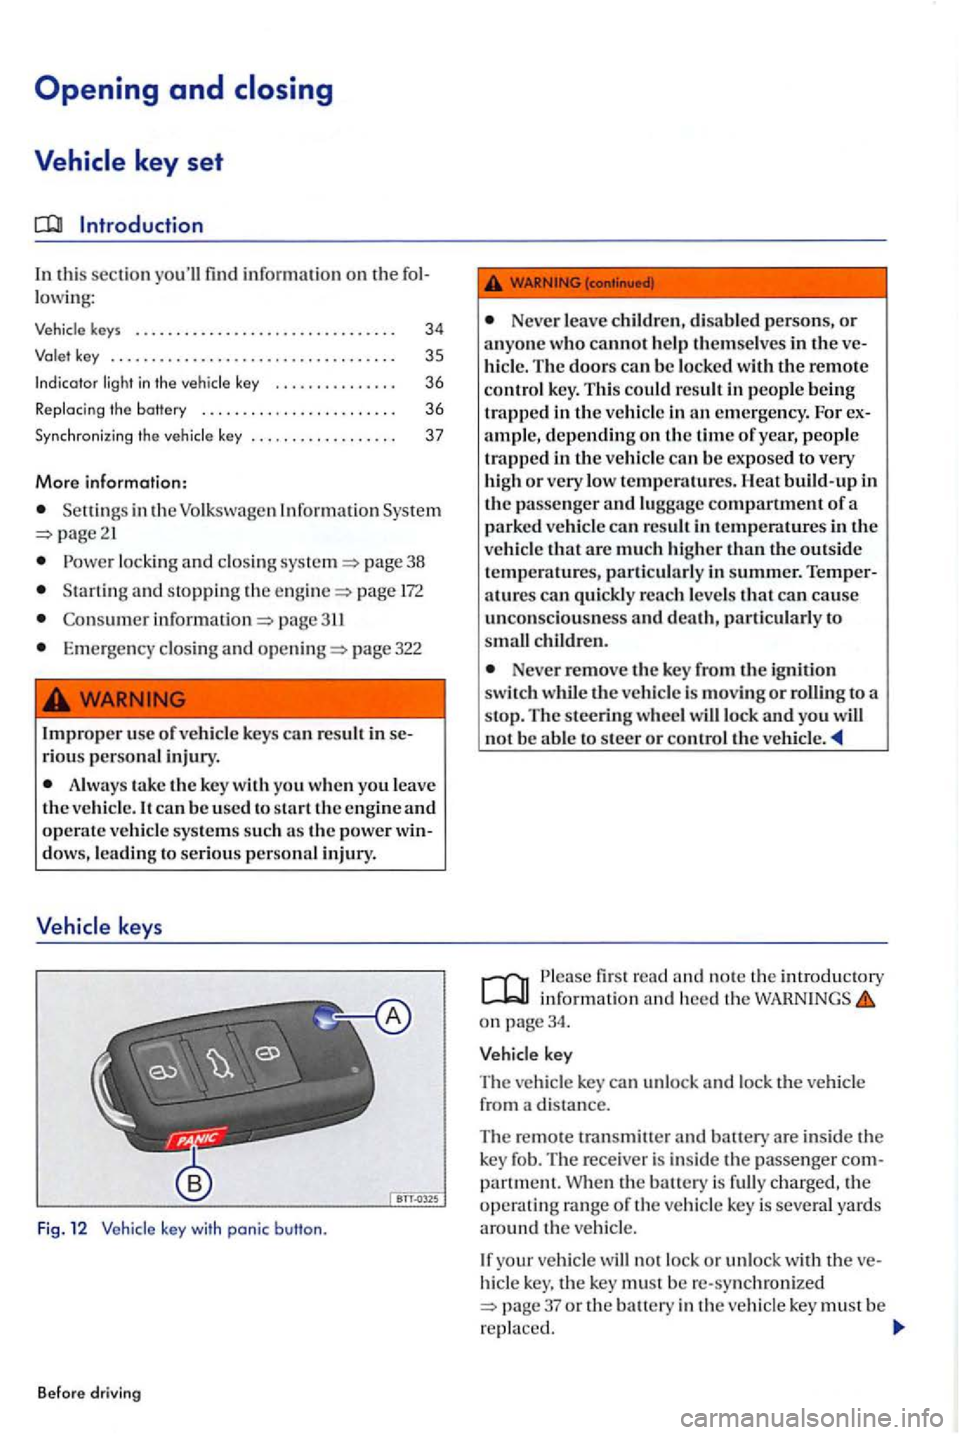 VOLKSWAGEN GOLF PLUS 2004  Owners Manual In this  sec tion find informa tion on th e 
key s . . .  . . . .  . . .  . . . . . . . 
. . .  3 5 
Indicator 
.  . . .  . . 36 
R ep lacing  the battery  . . . . .  . . .  . .  . . . . . . .  . . . 